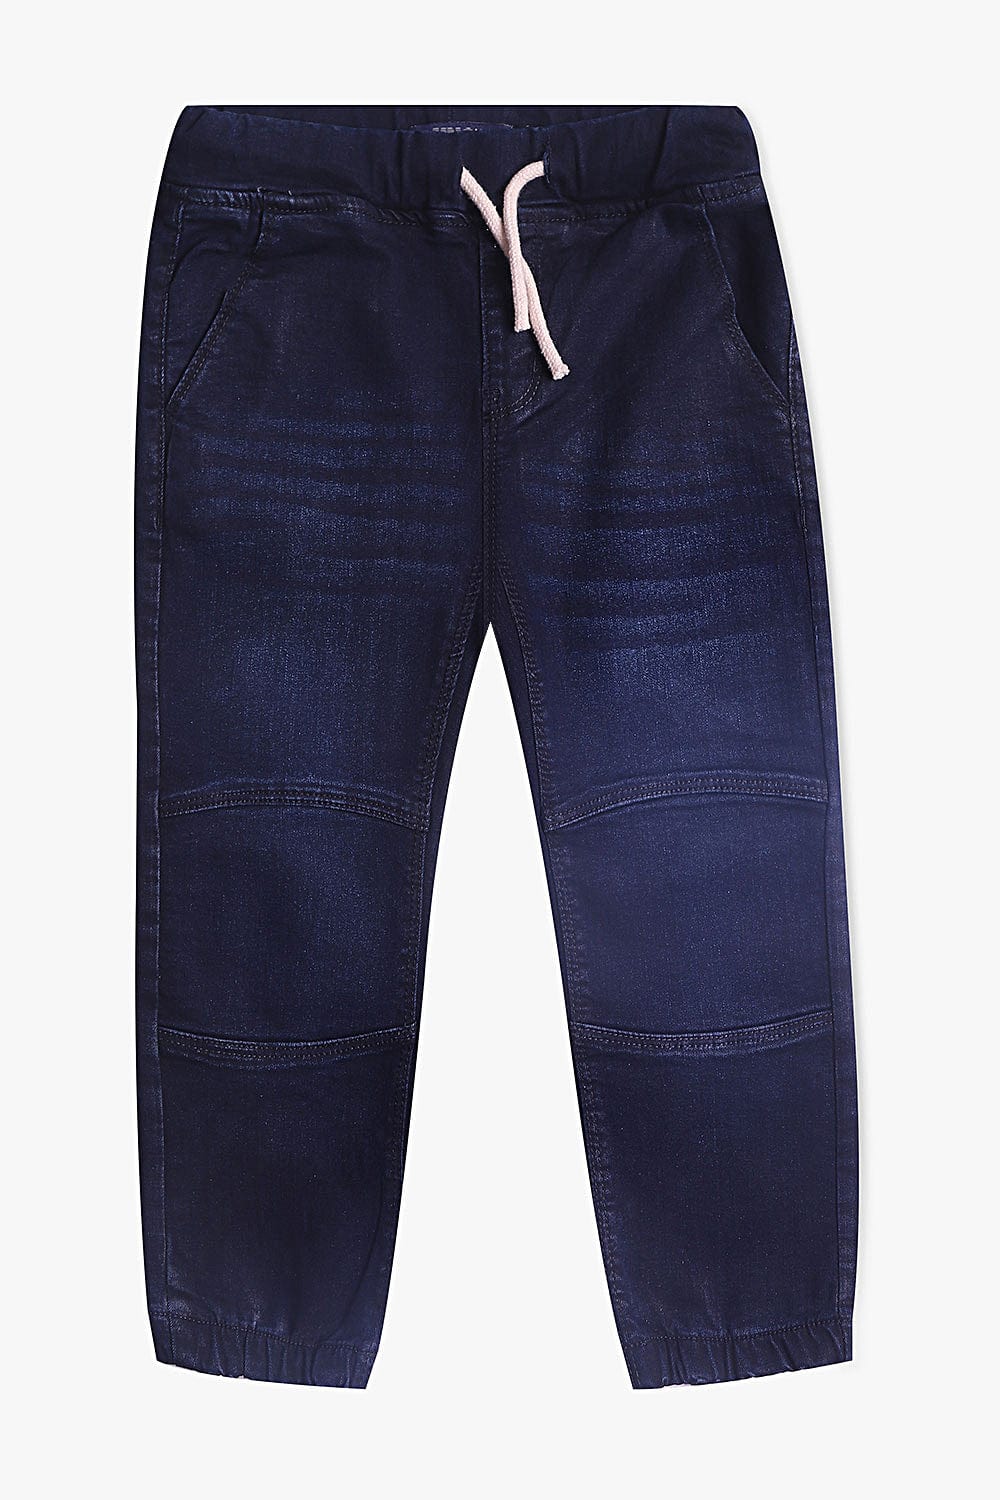 Hope Not Out by Shahid Afridi Boys Denim Pants Jogger Pants